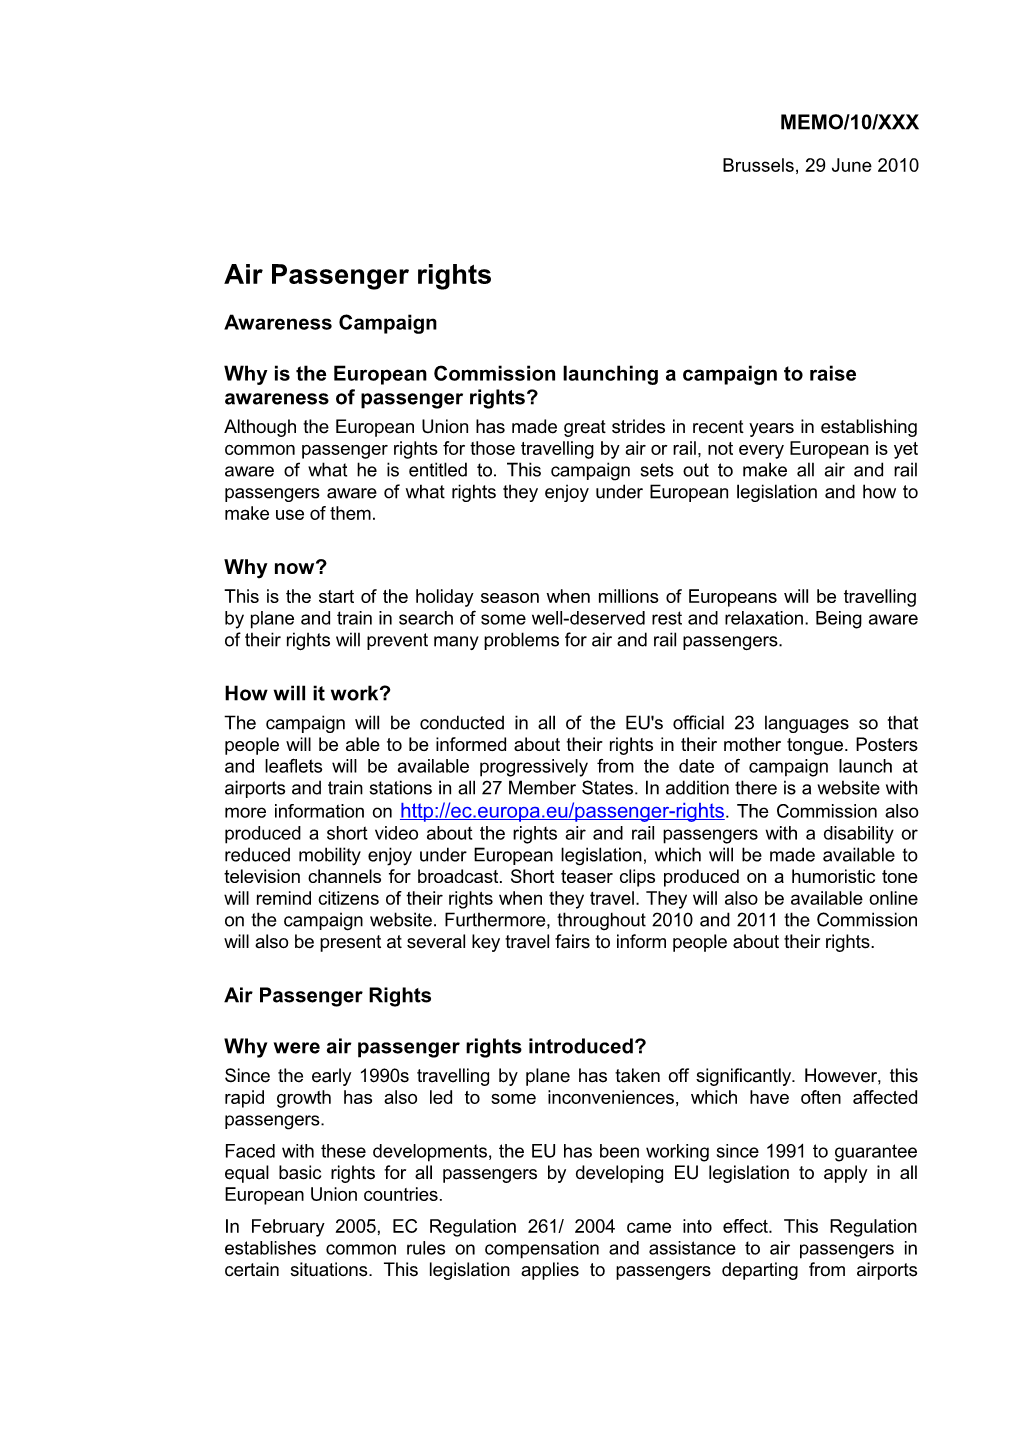 Why Is the European Commission Launching a Campaign to Raise Awareness of Passenger Rights?